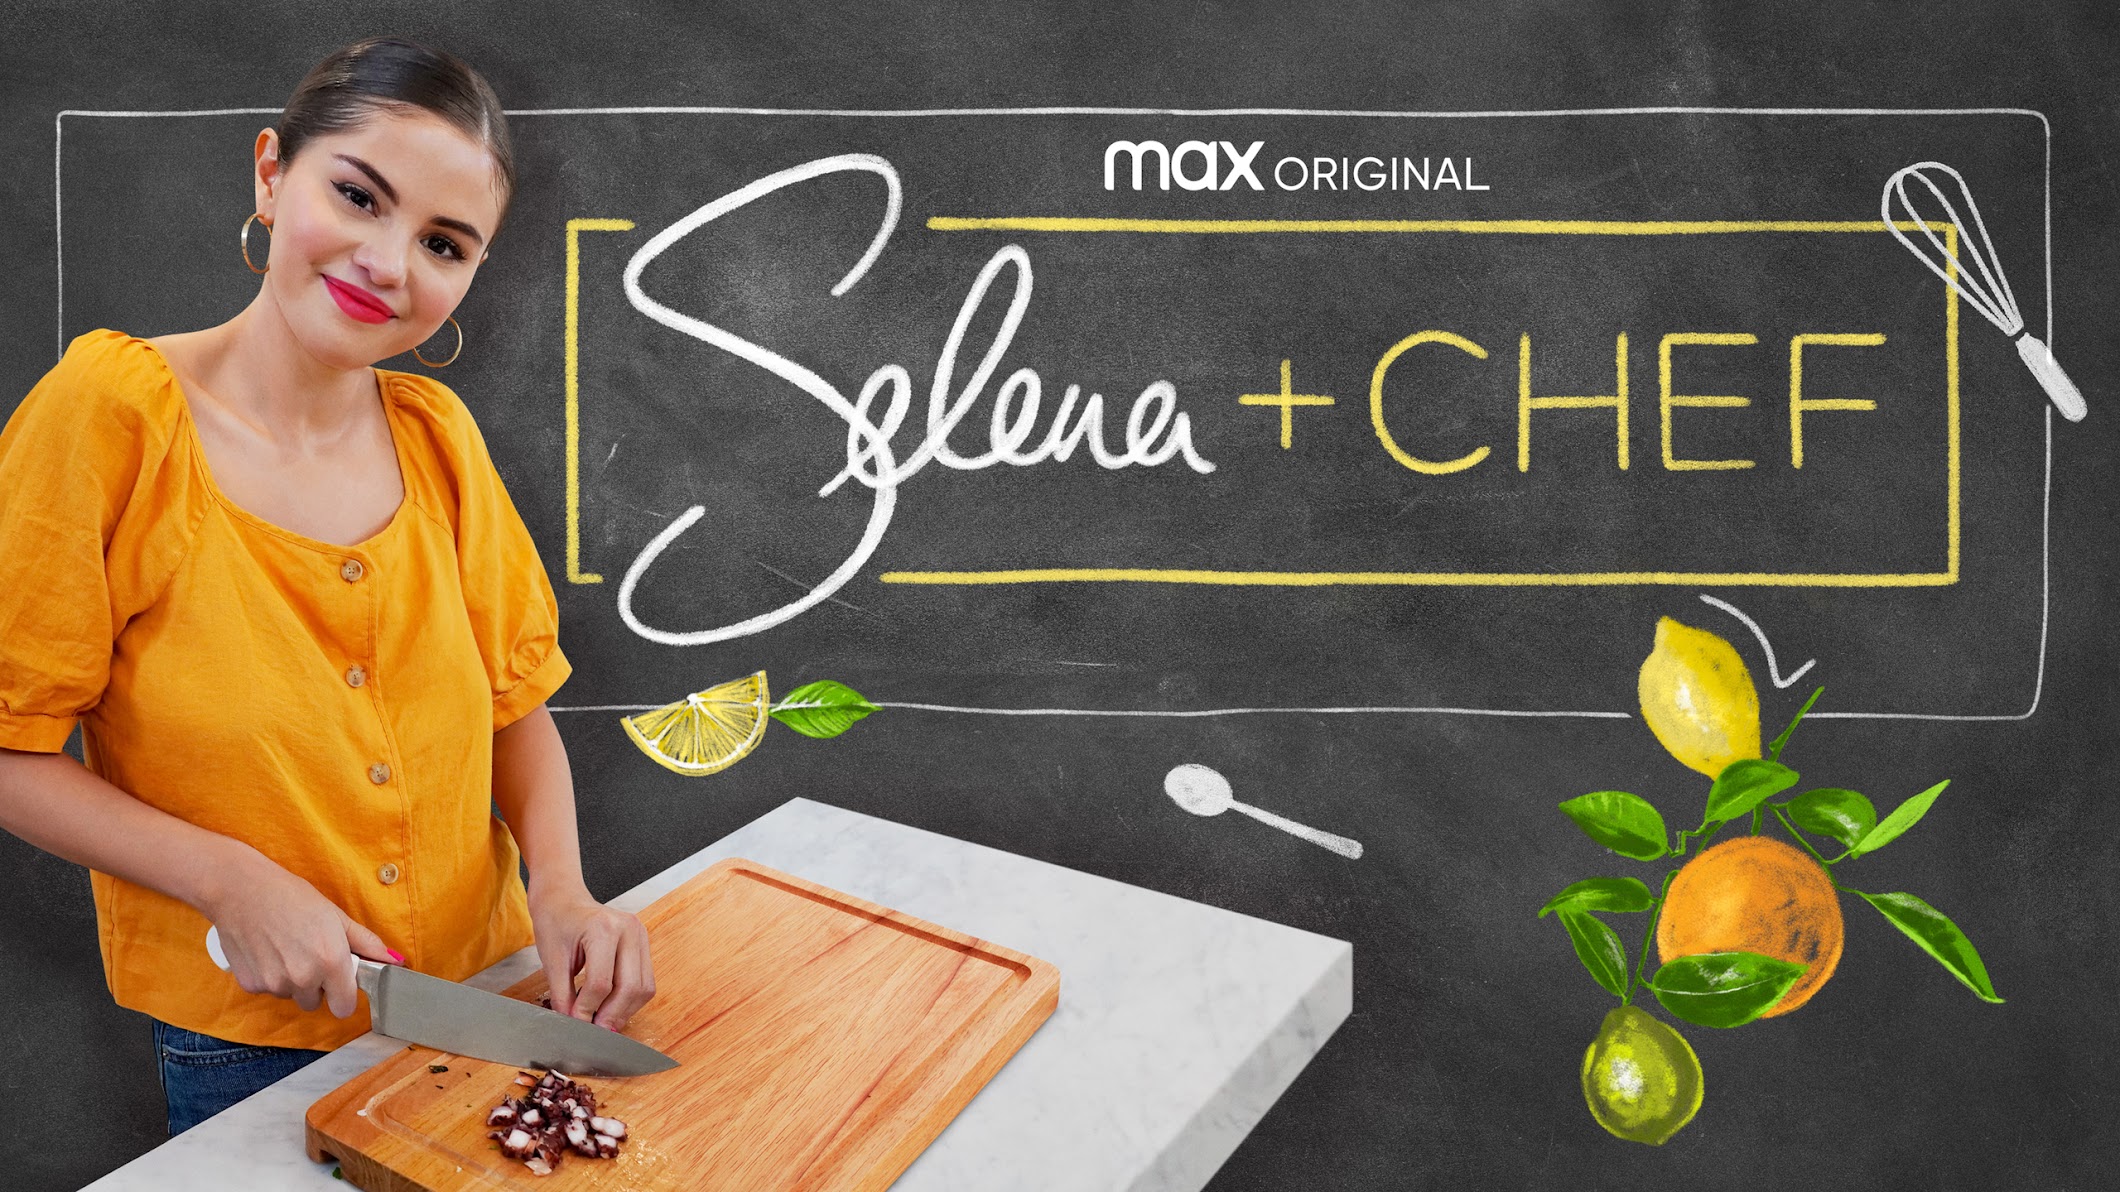 Love Selena Gomez’s “Selena + Chef” Cooking Show? Then You’ll Love the “Selena + Chef” Cookware Featured on the Show